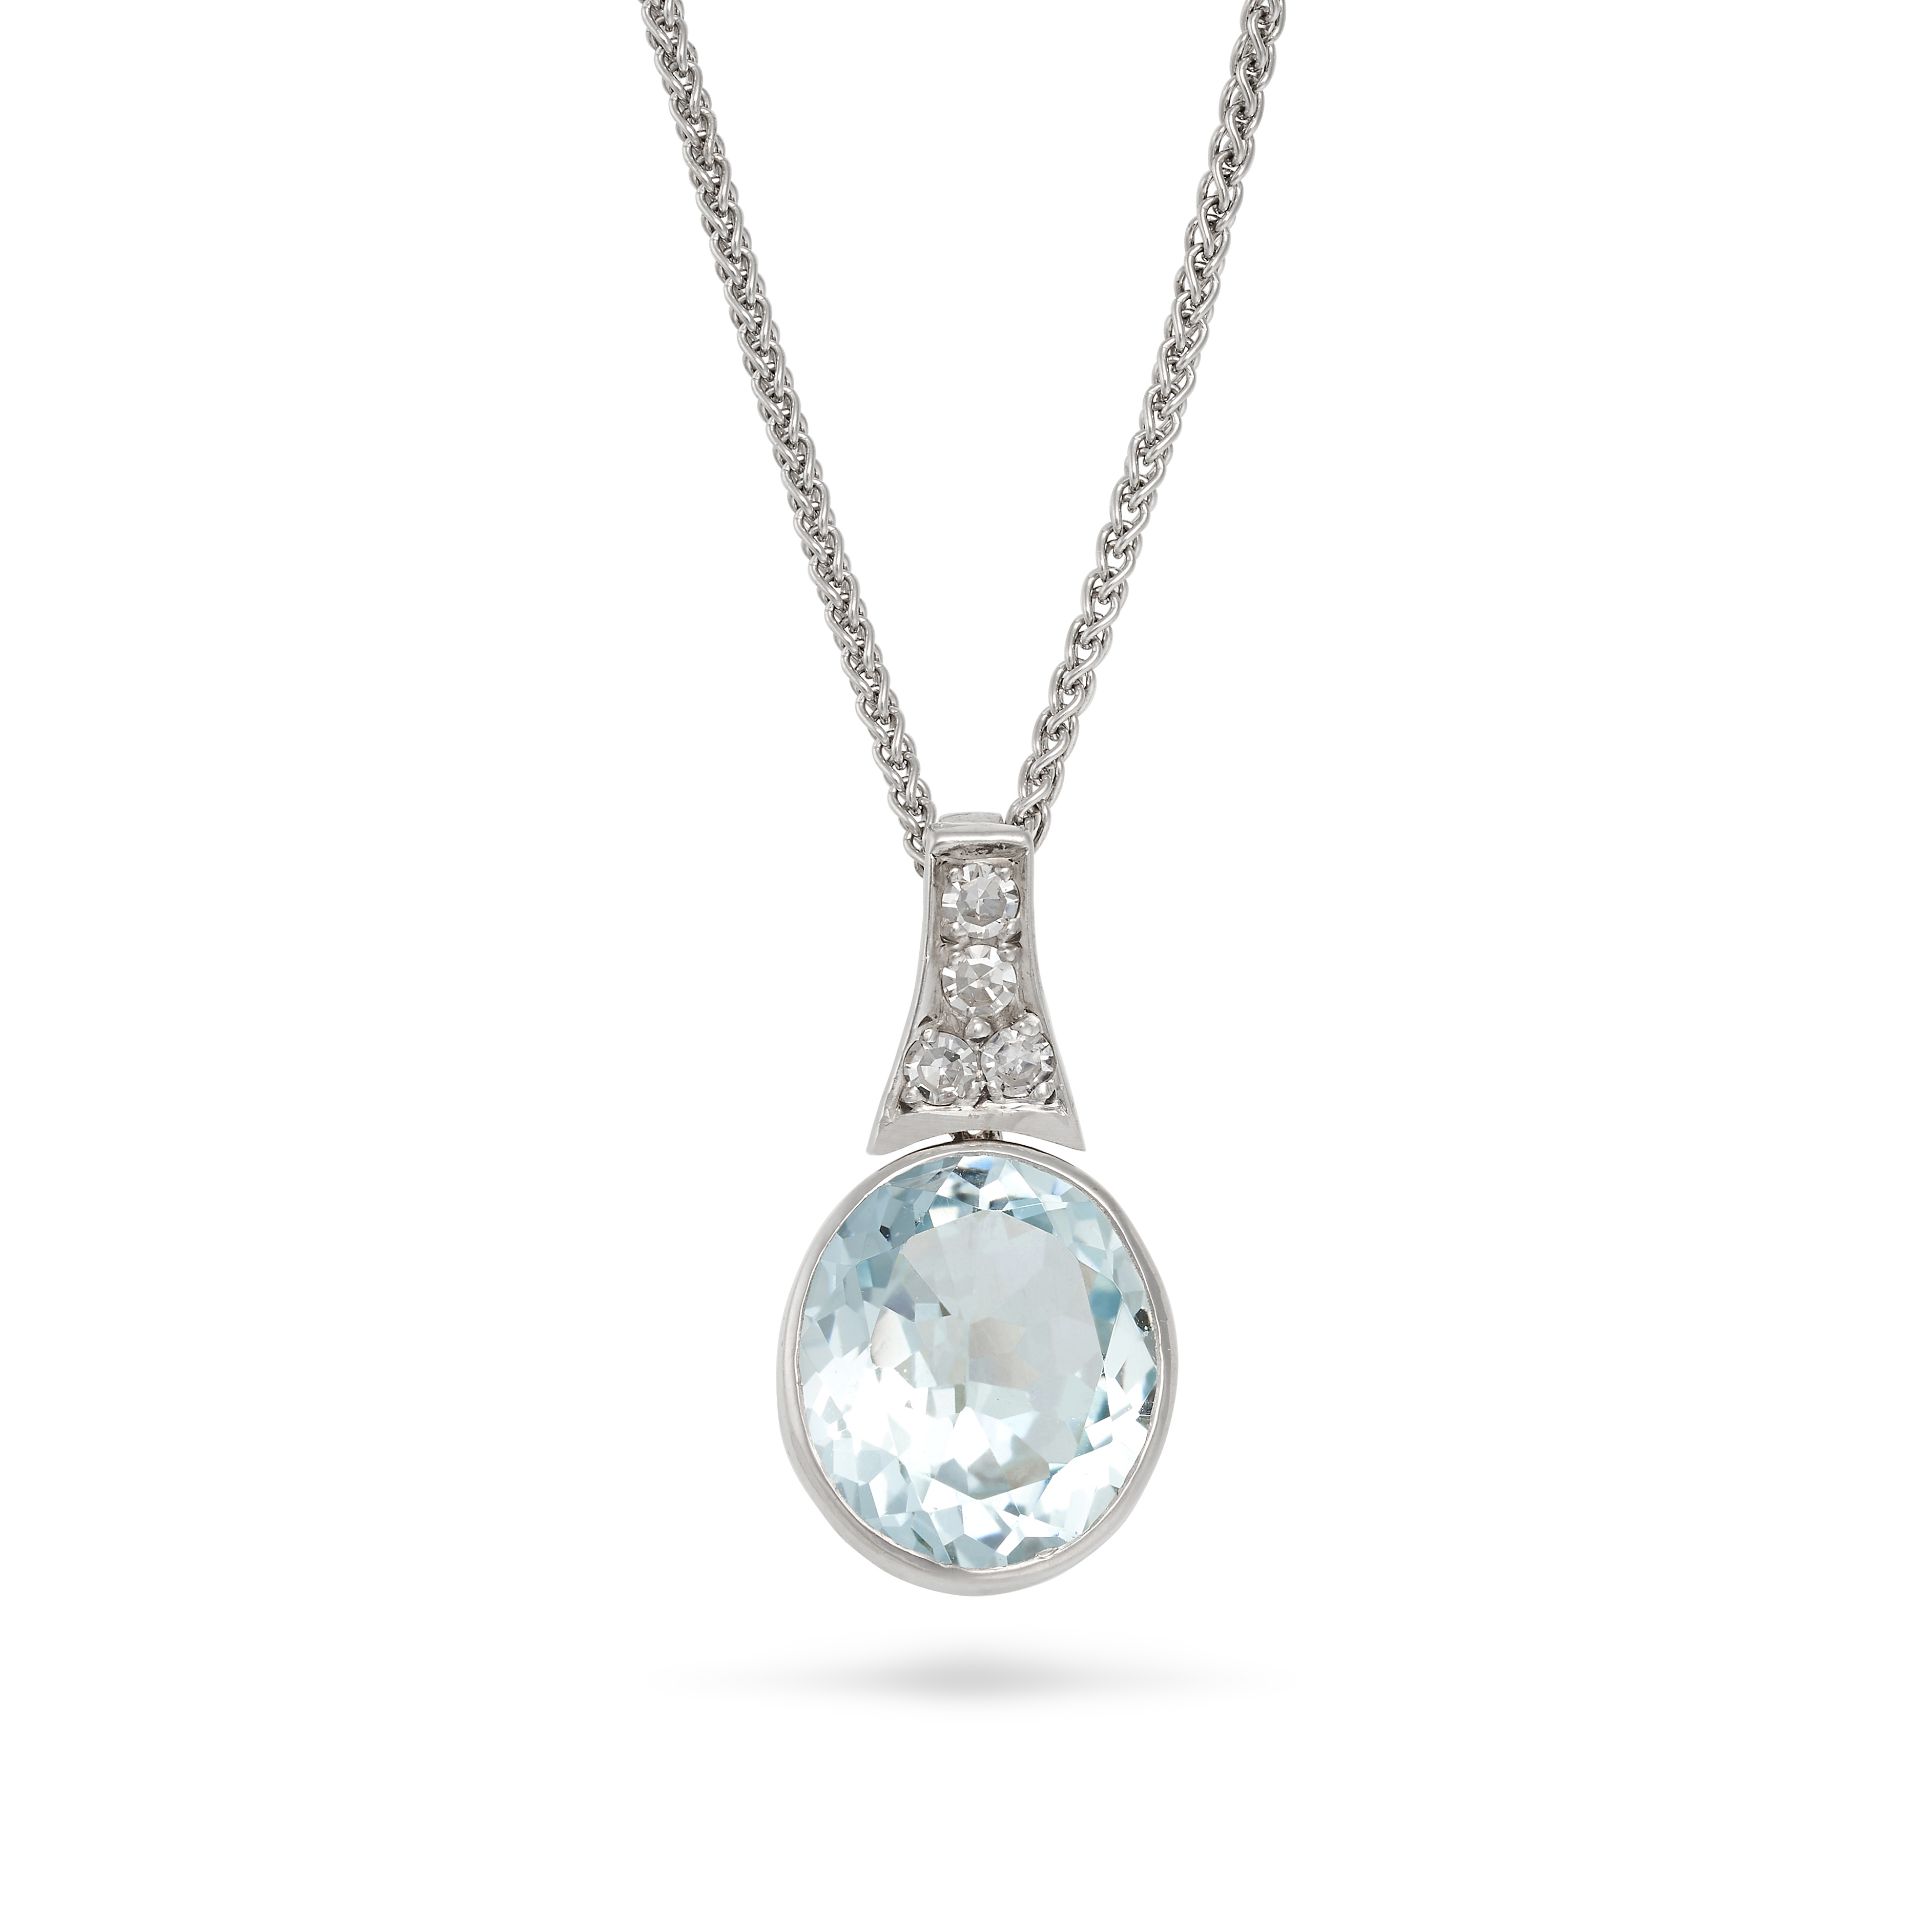 AN AQUAMARINE AND DIAMOND PENDANT NECKLACE in 18ct white gold, the pendant set with an oval cut a...